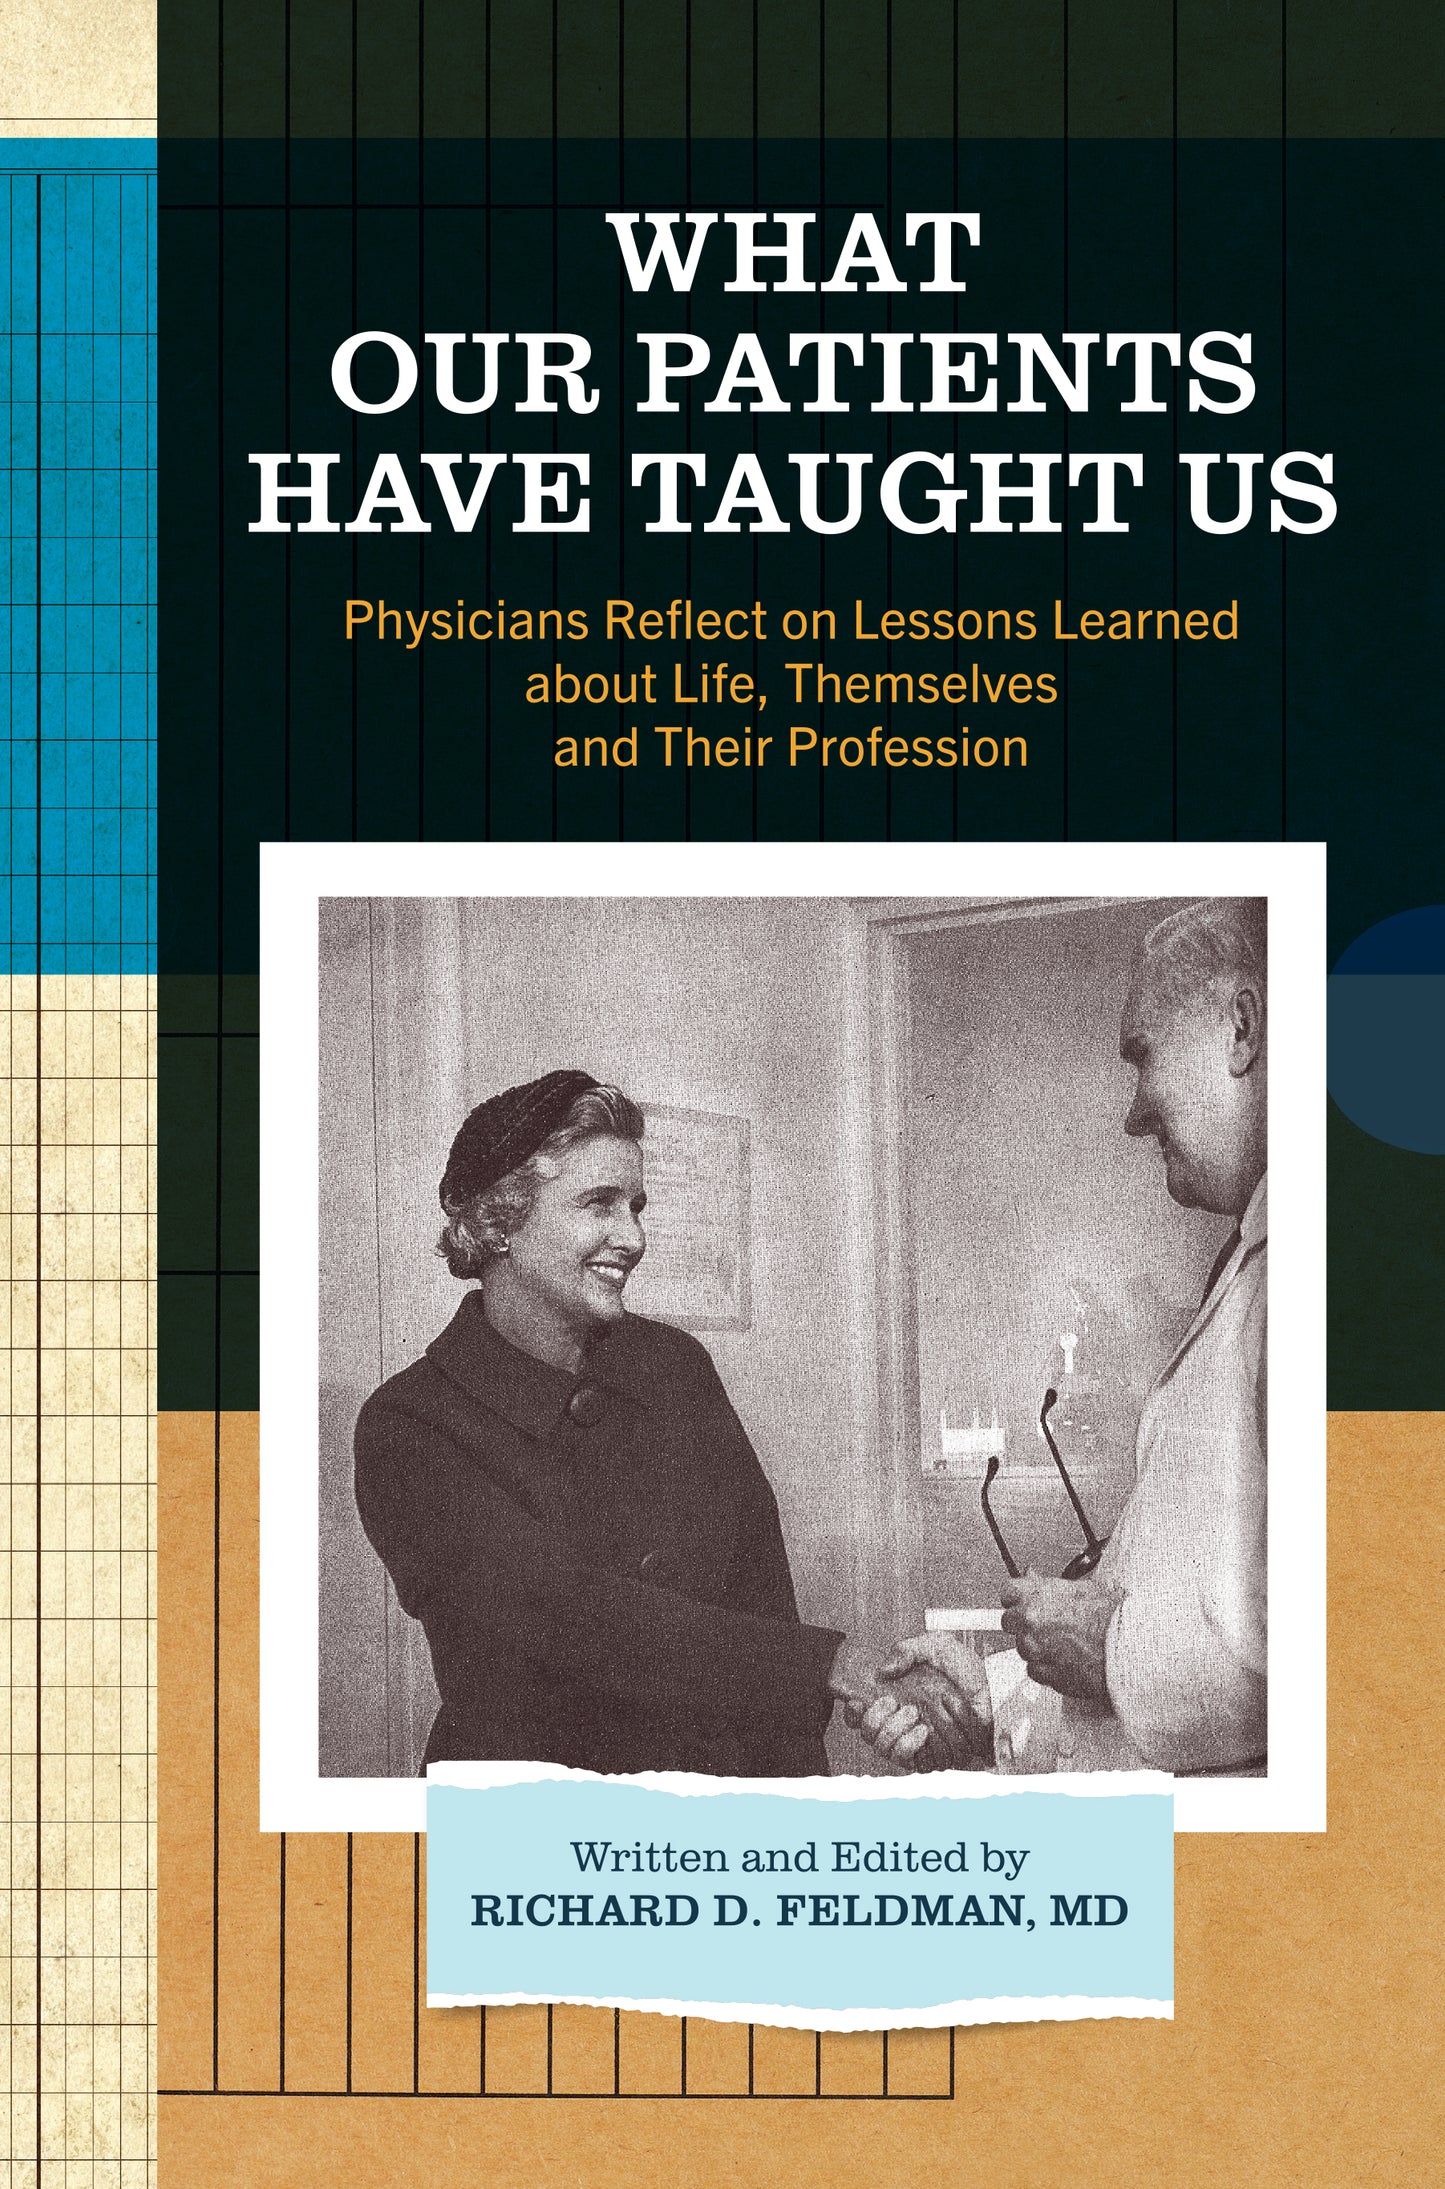 What Our Patients Have Taught Us: Physicians Reflect on Lessons Learned about Life, Themselves and Their Profession